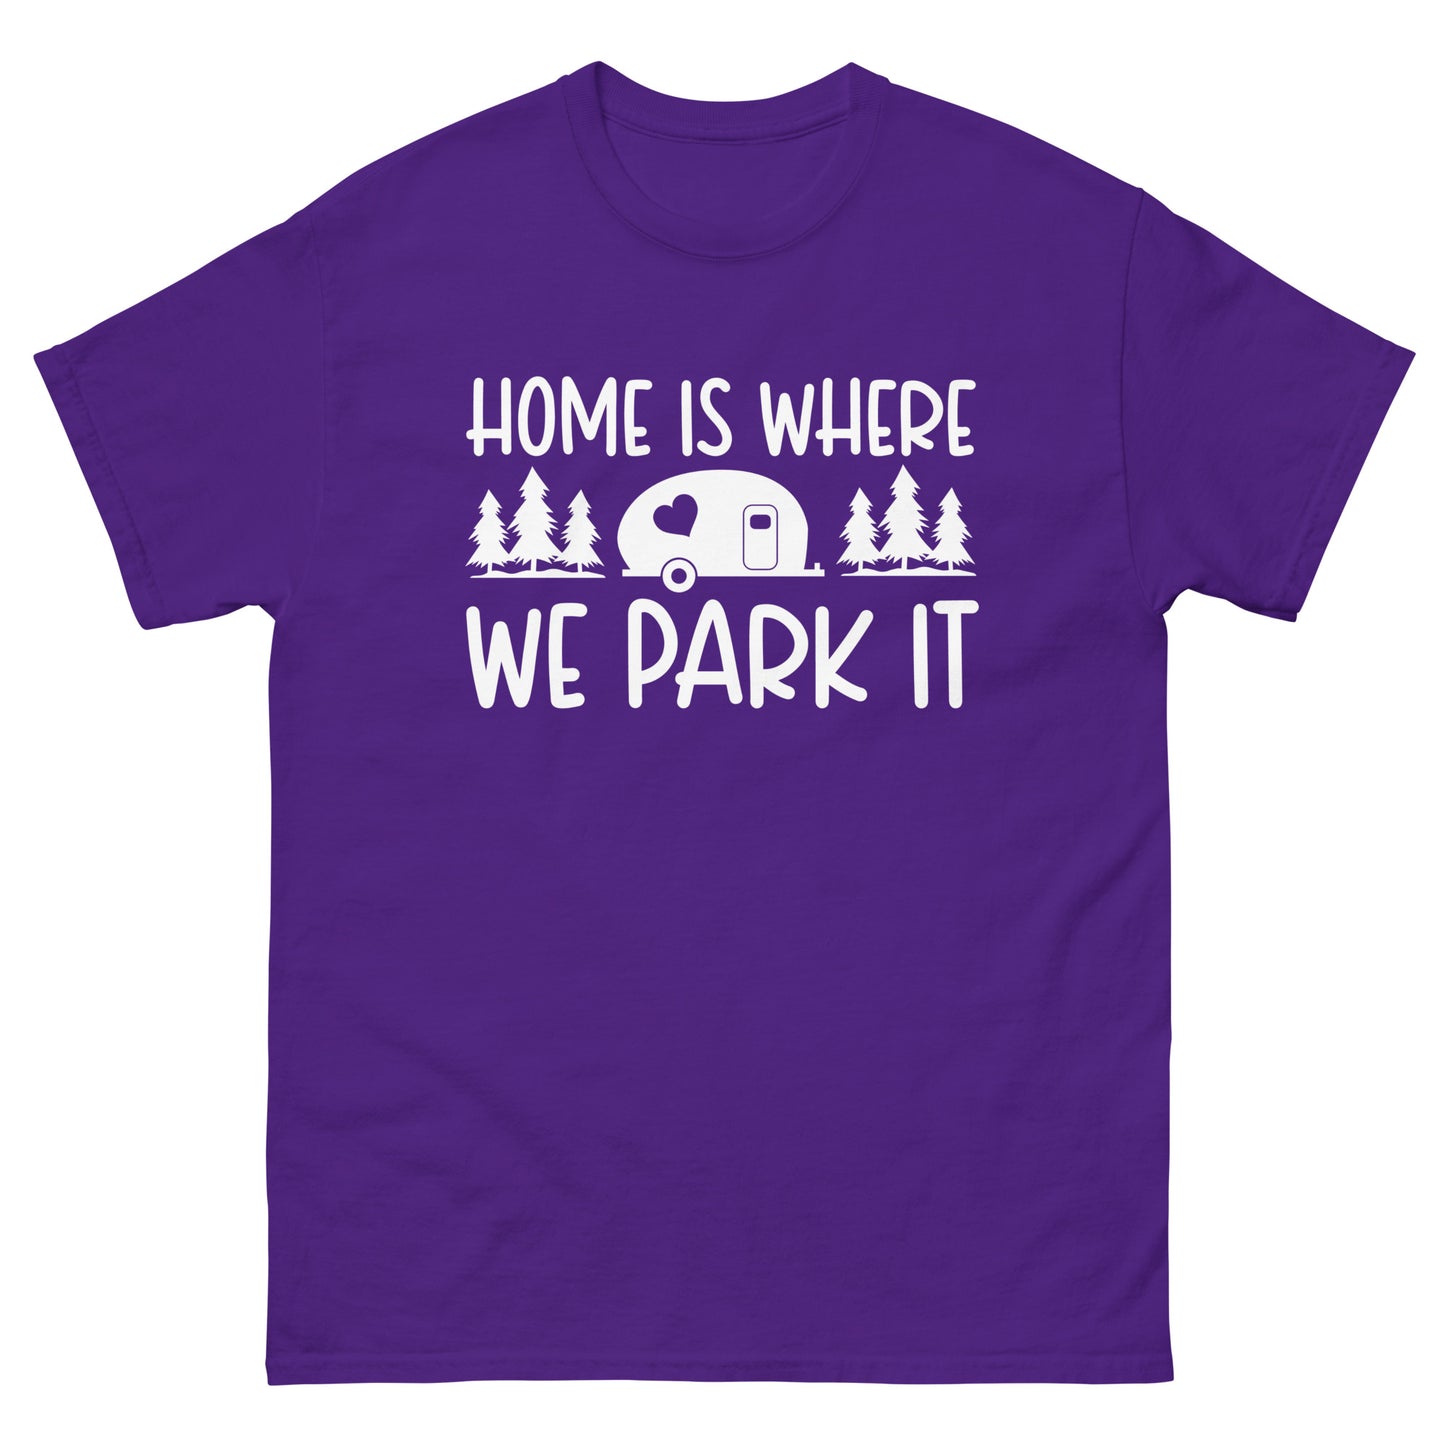 Home is where we park it classic tee